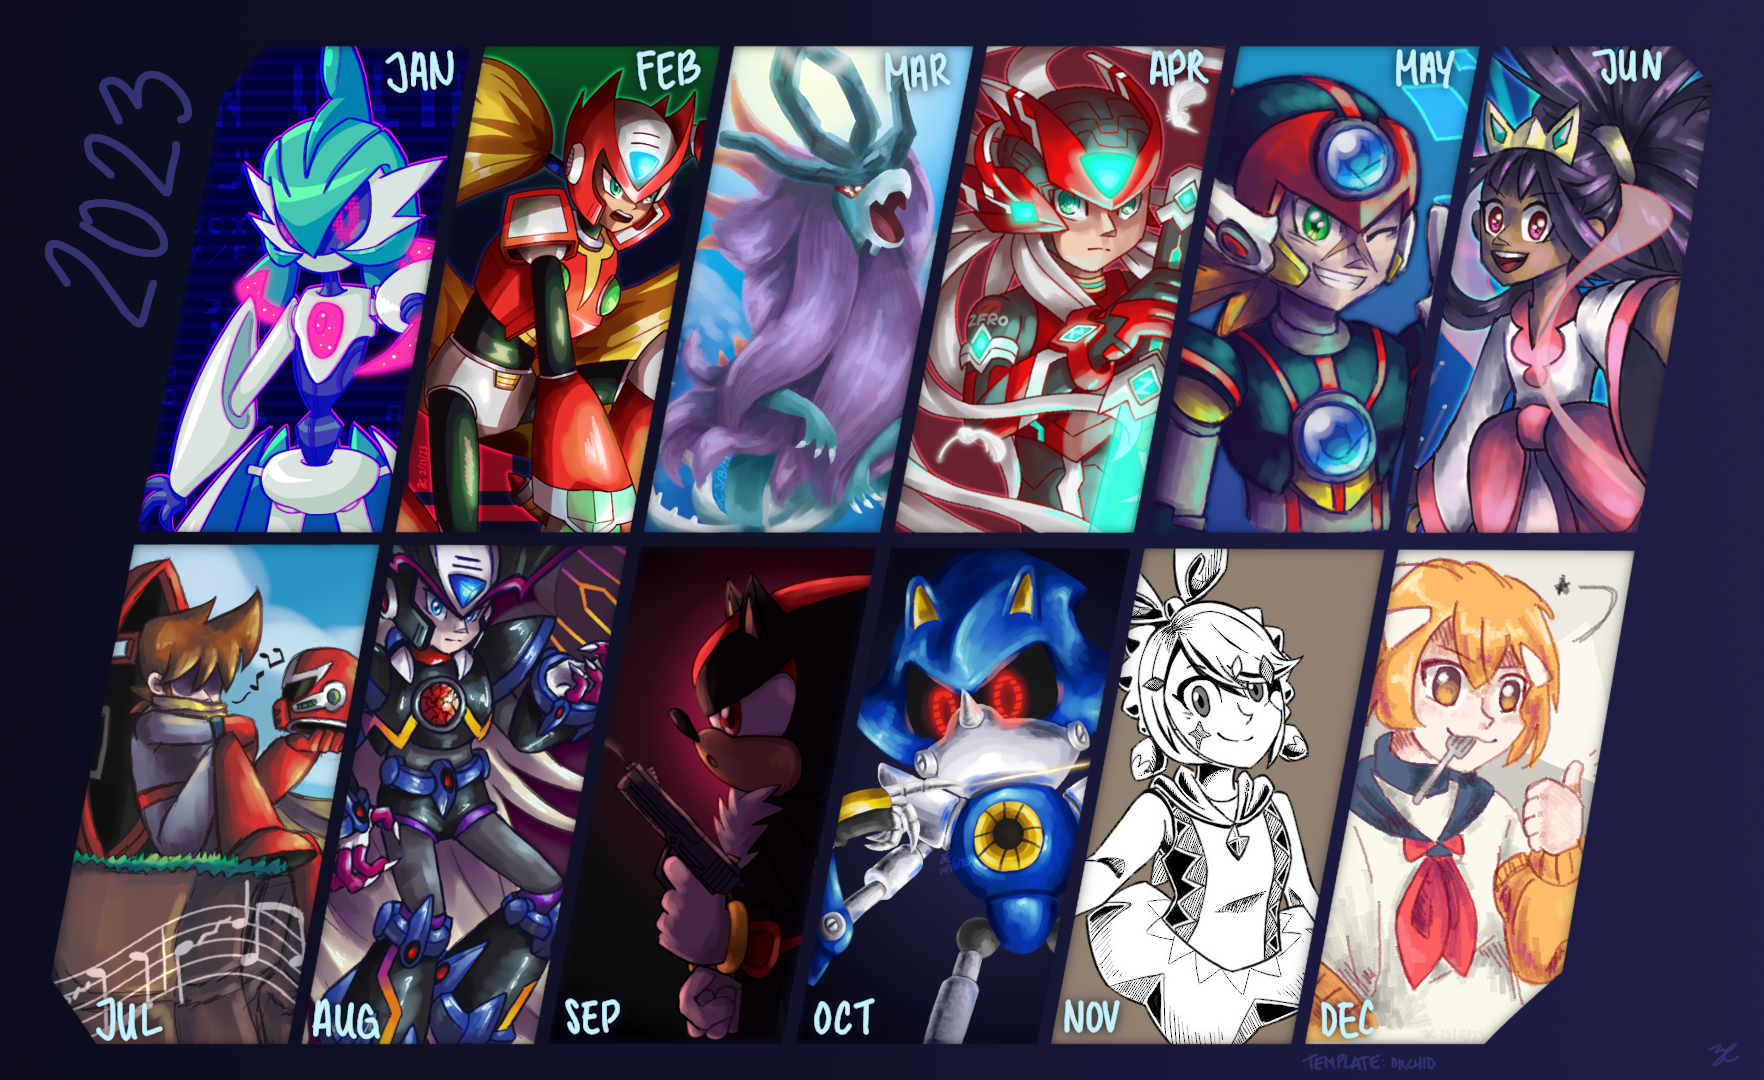 imagine going back to january and telling my past self that shadow the hedgehog would end up in my art recap this year